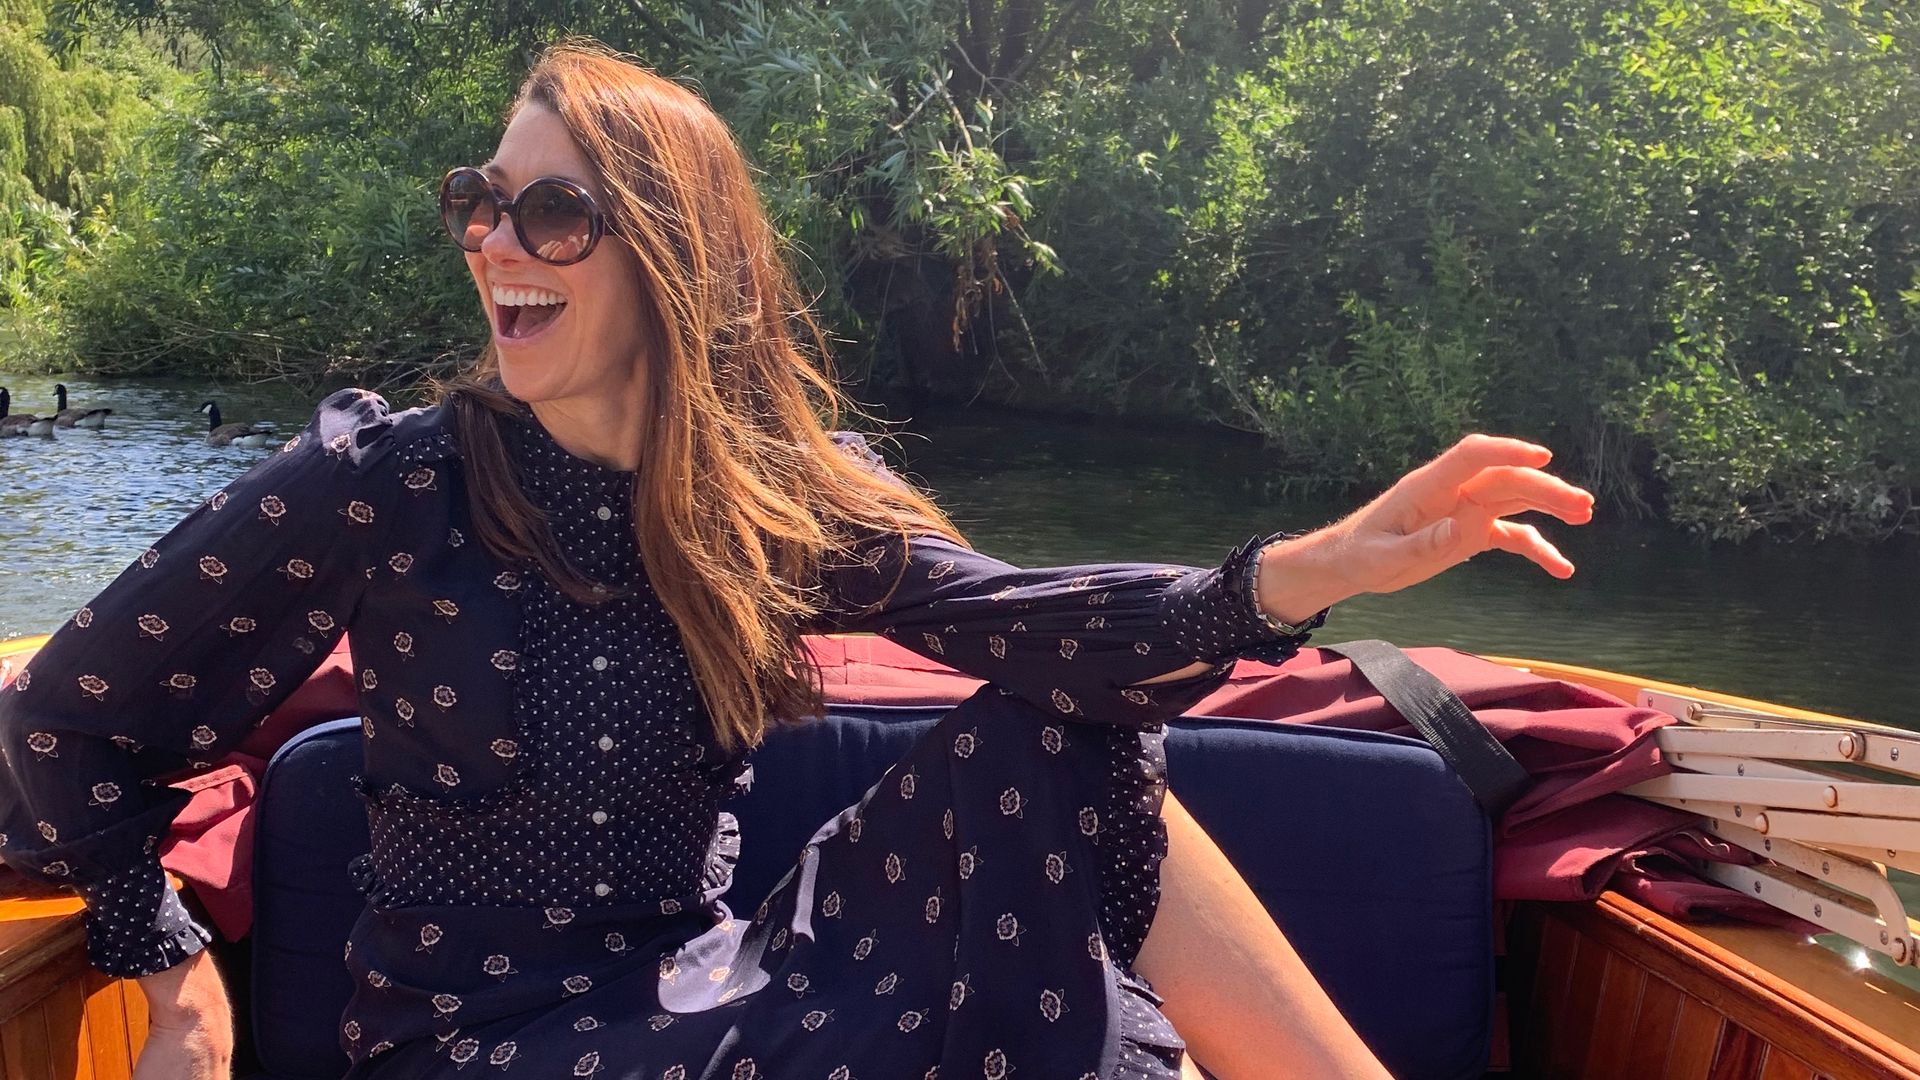 Woman laughing on a boat